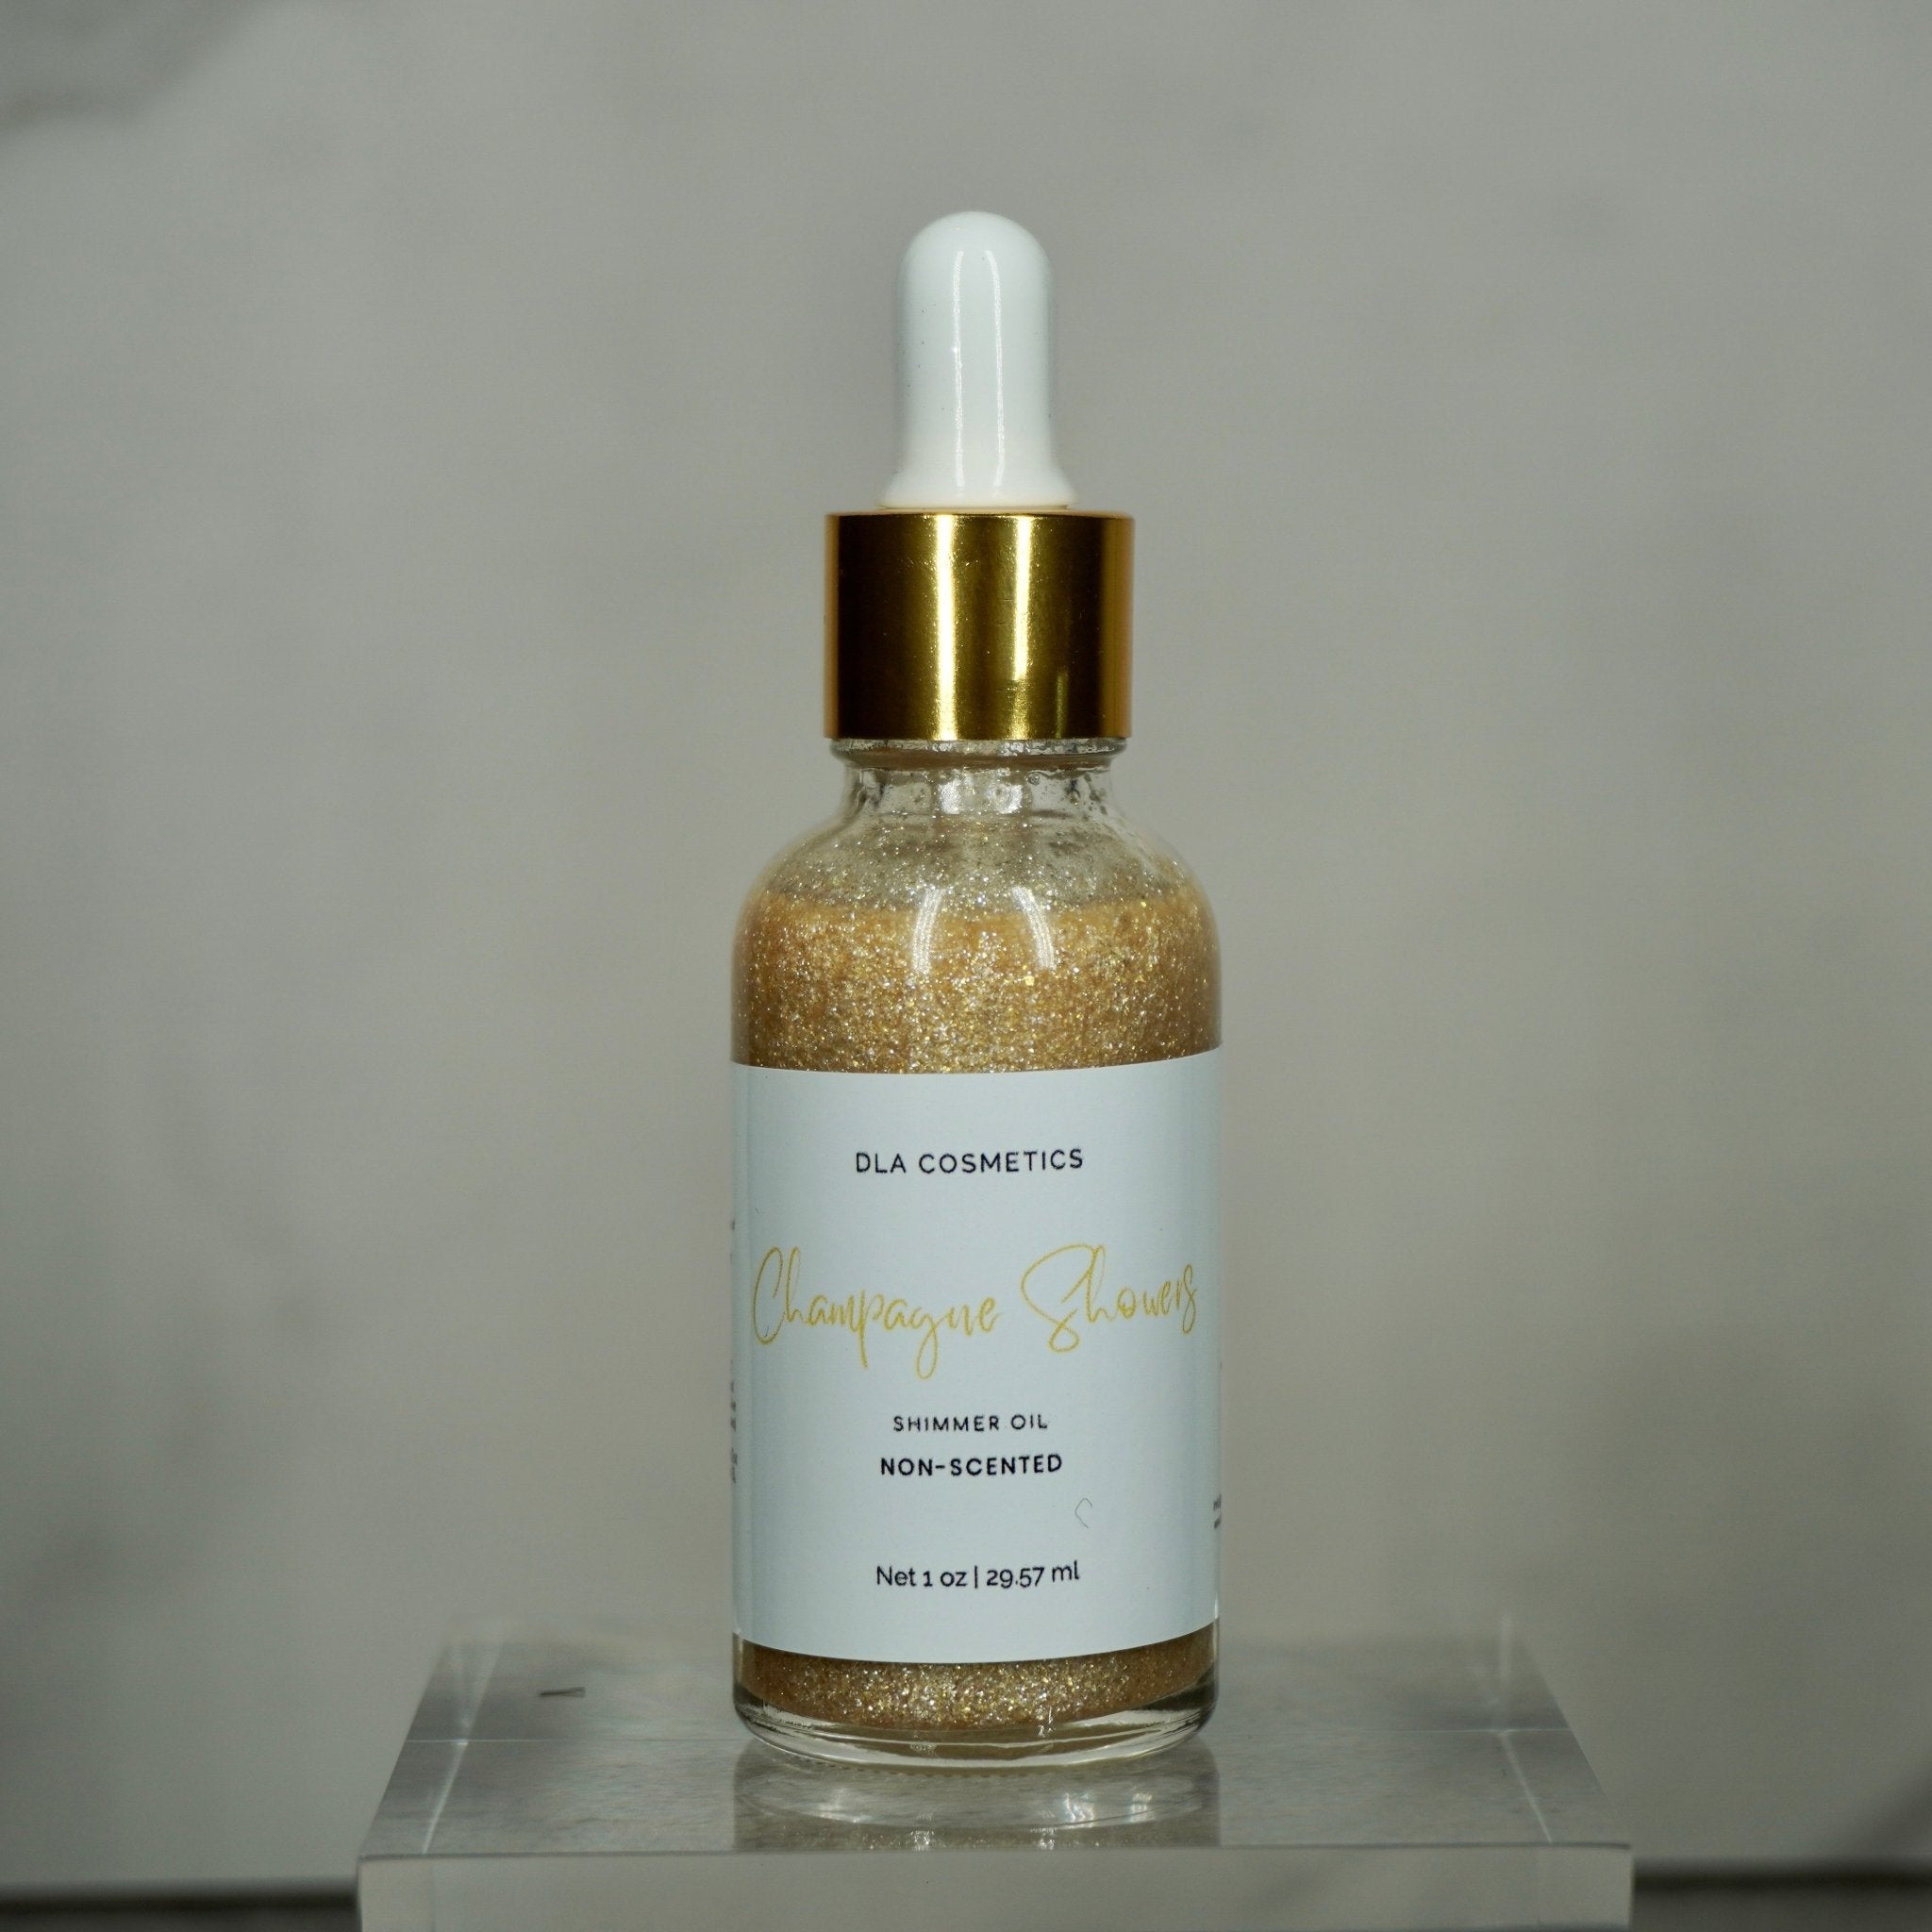 Body & Hair Glitter CHAMPAGNE SHOWERS SHIMMER OIL - DLA Cosmetics-Skin care products online